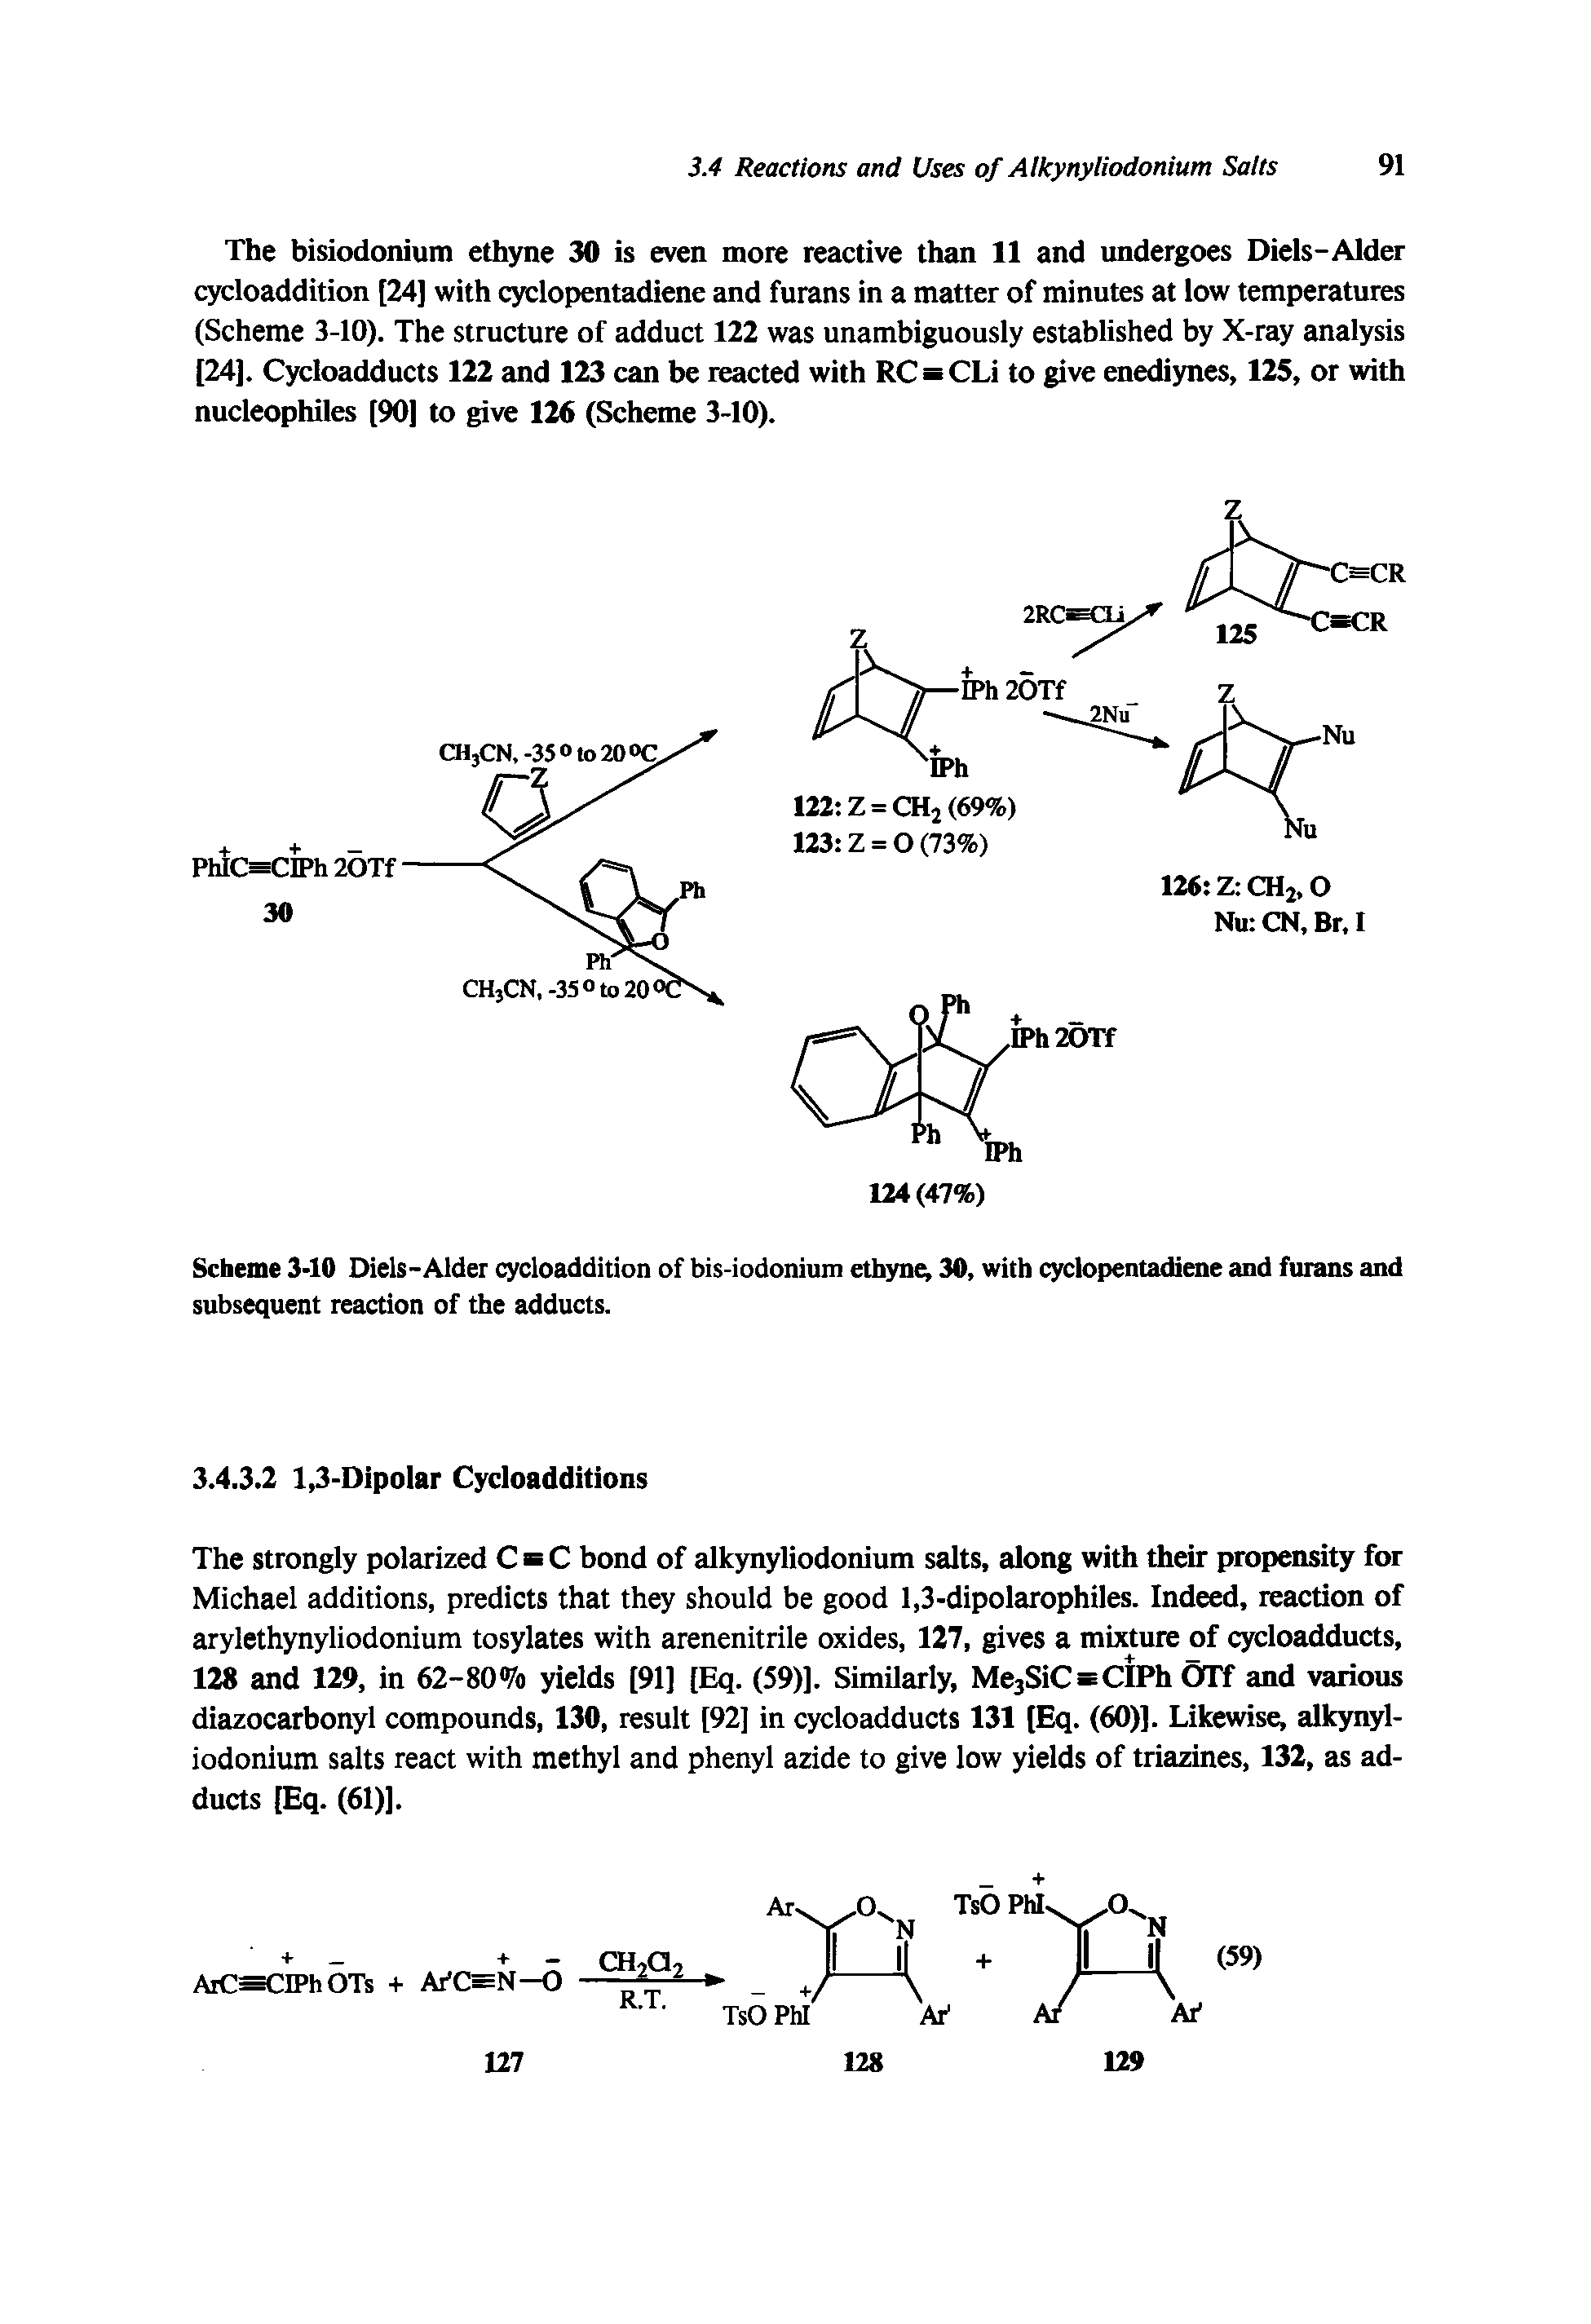 Scheme 3-10 Diels-Alder cycloaddition of bis-iodonium ethyn 30, with cyclopentadiene and furans and subsequent reaction of the adducts.